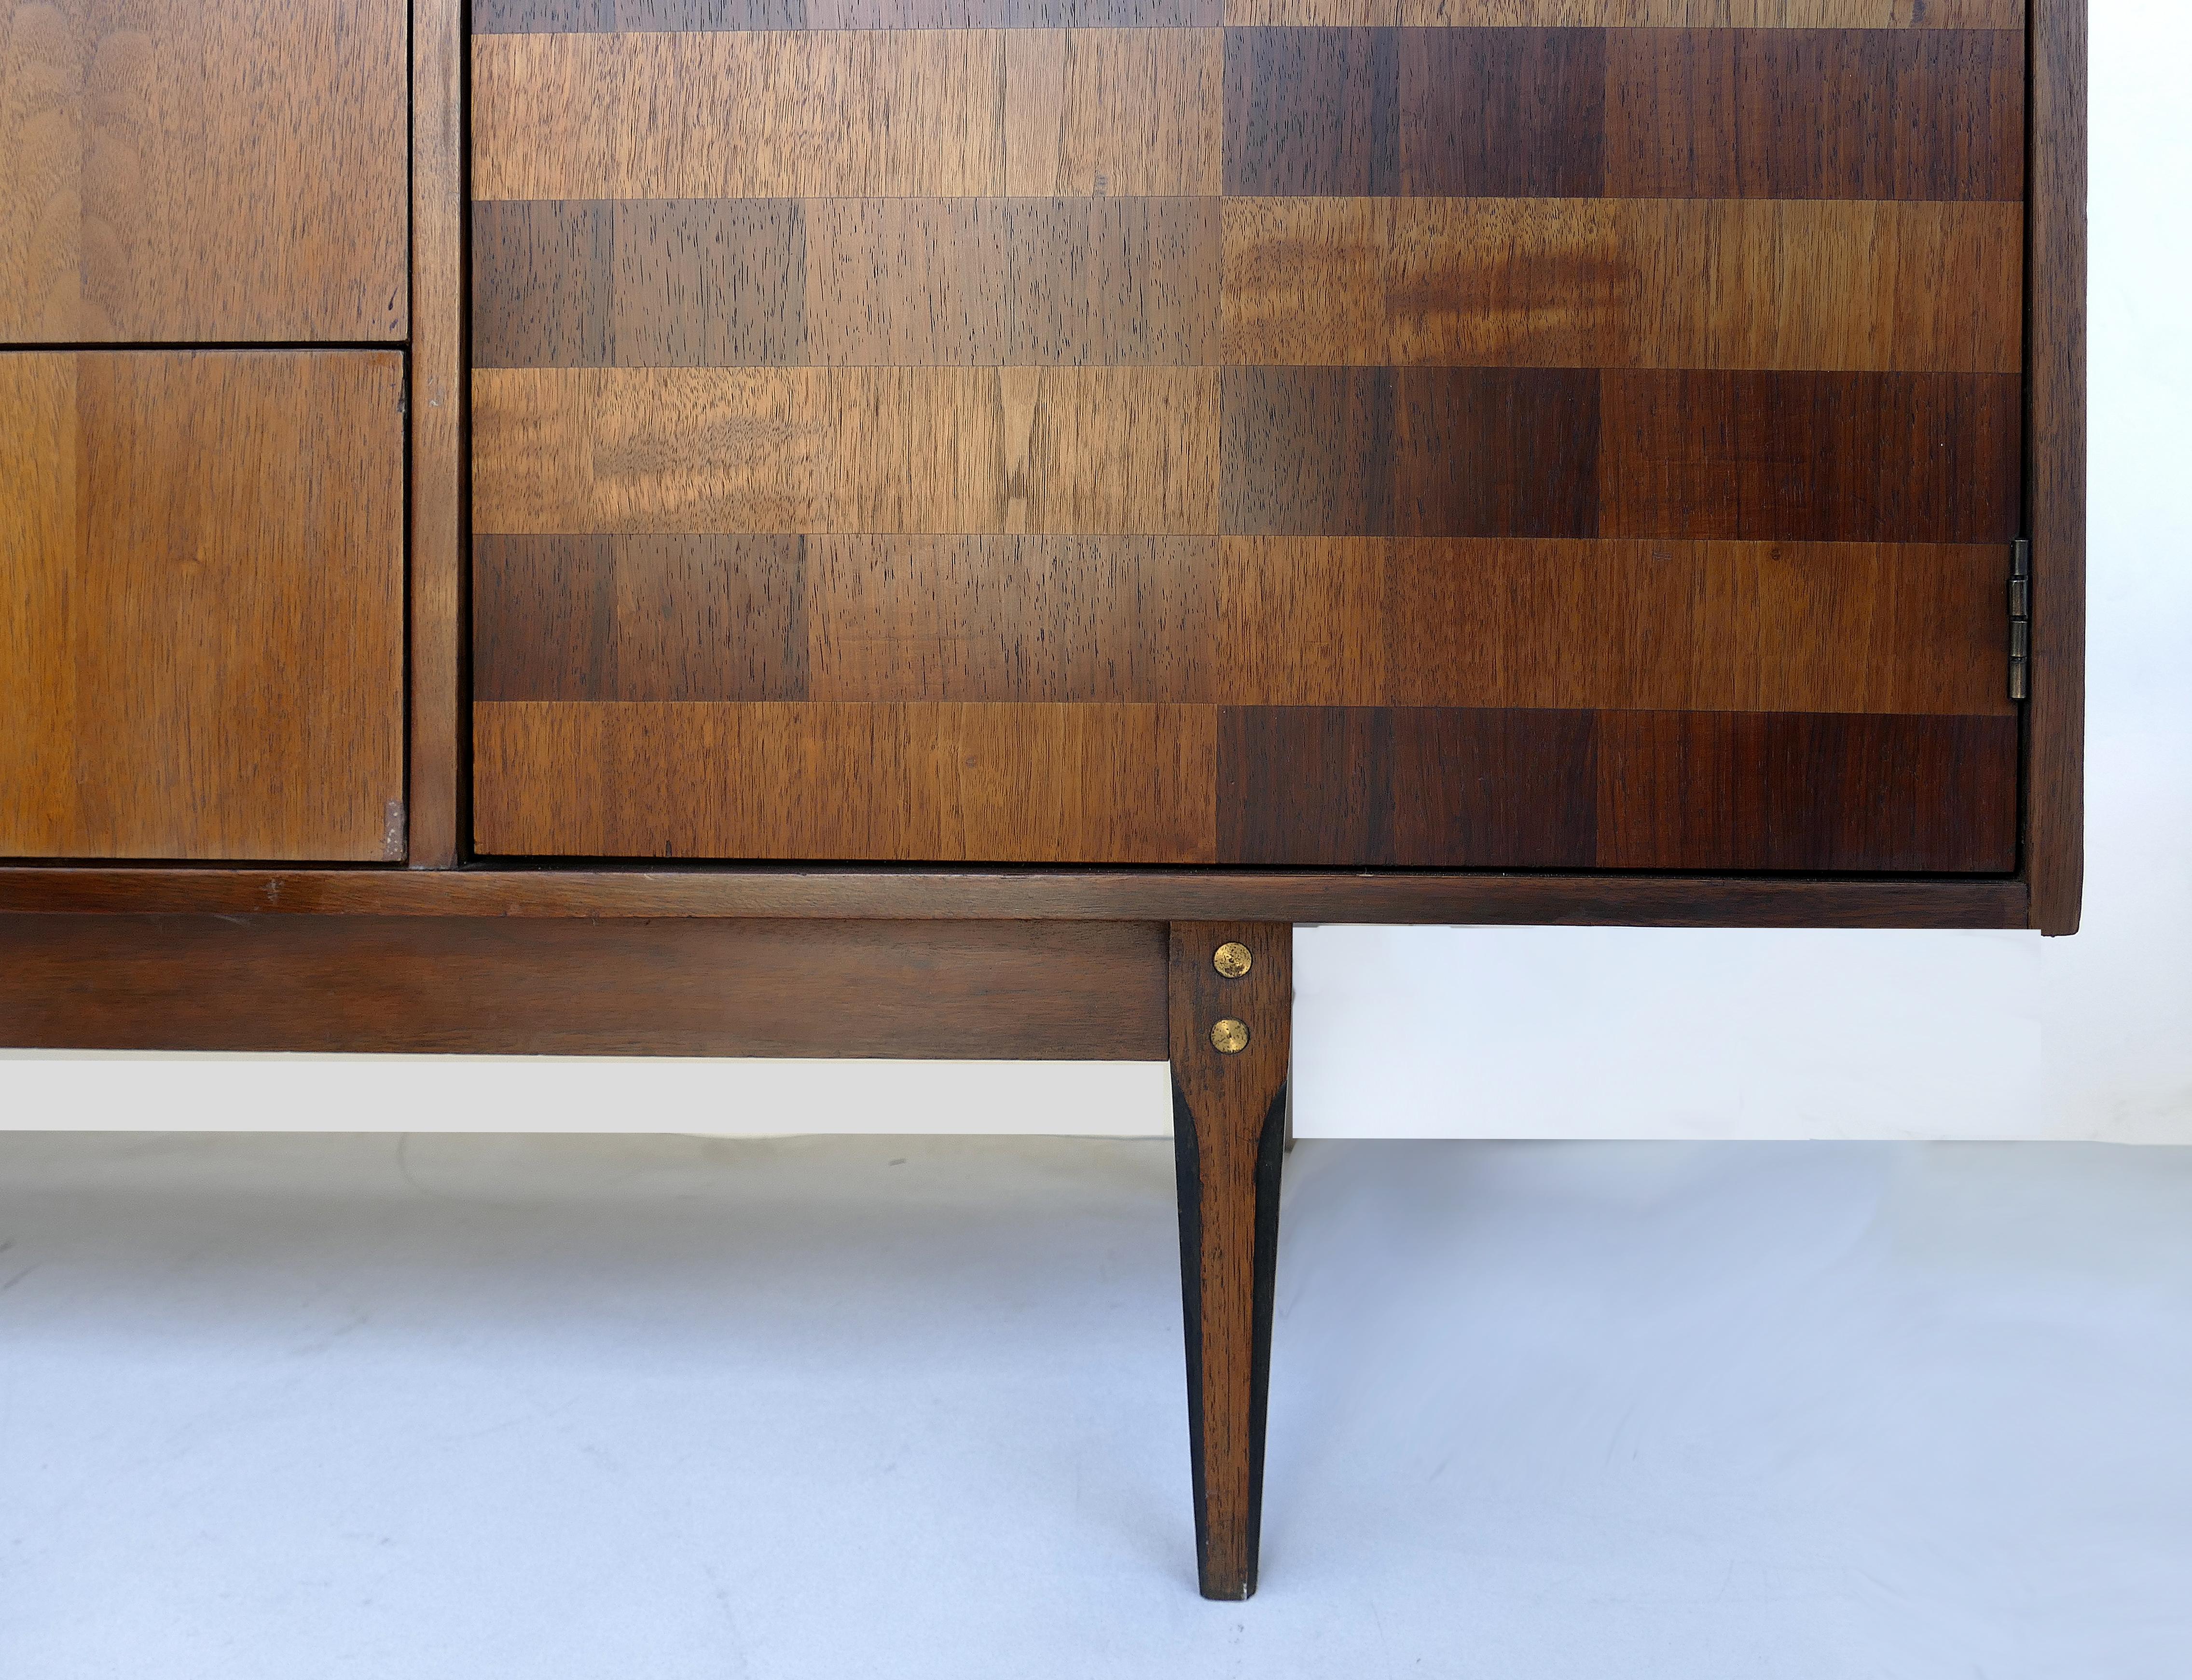 20th Century Kroehler Custom Crafted Credenza w/ Rosewood Inlays and Enameled Brass Hardware